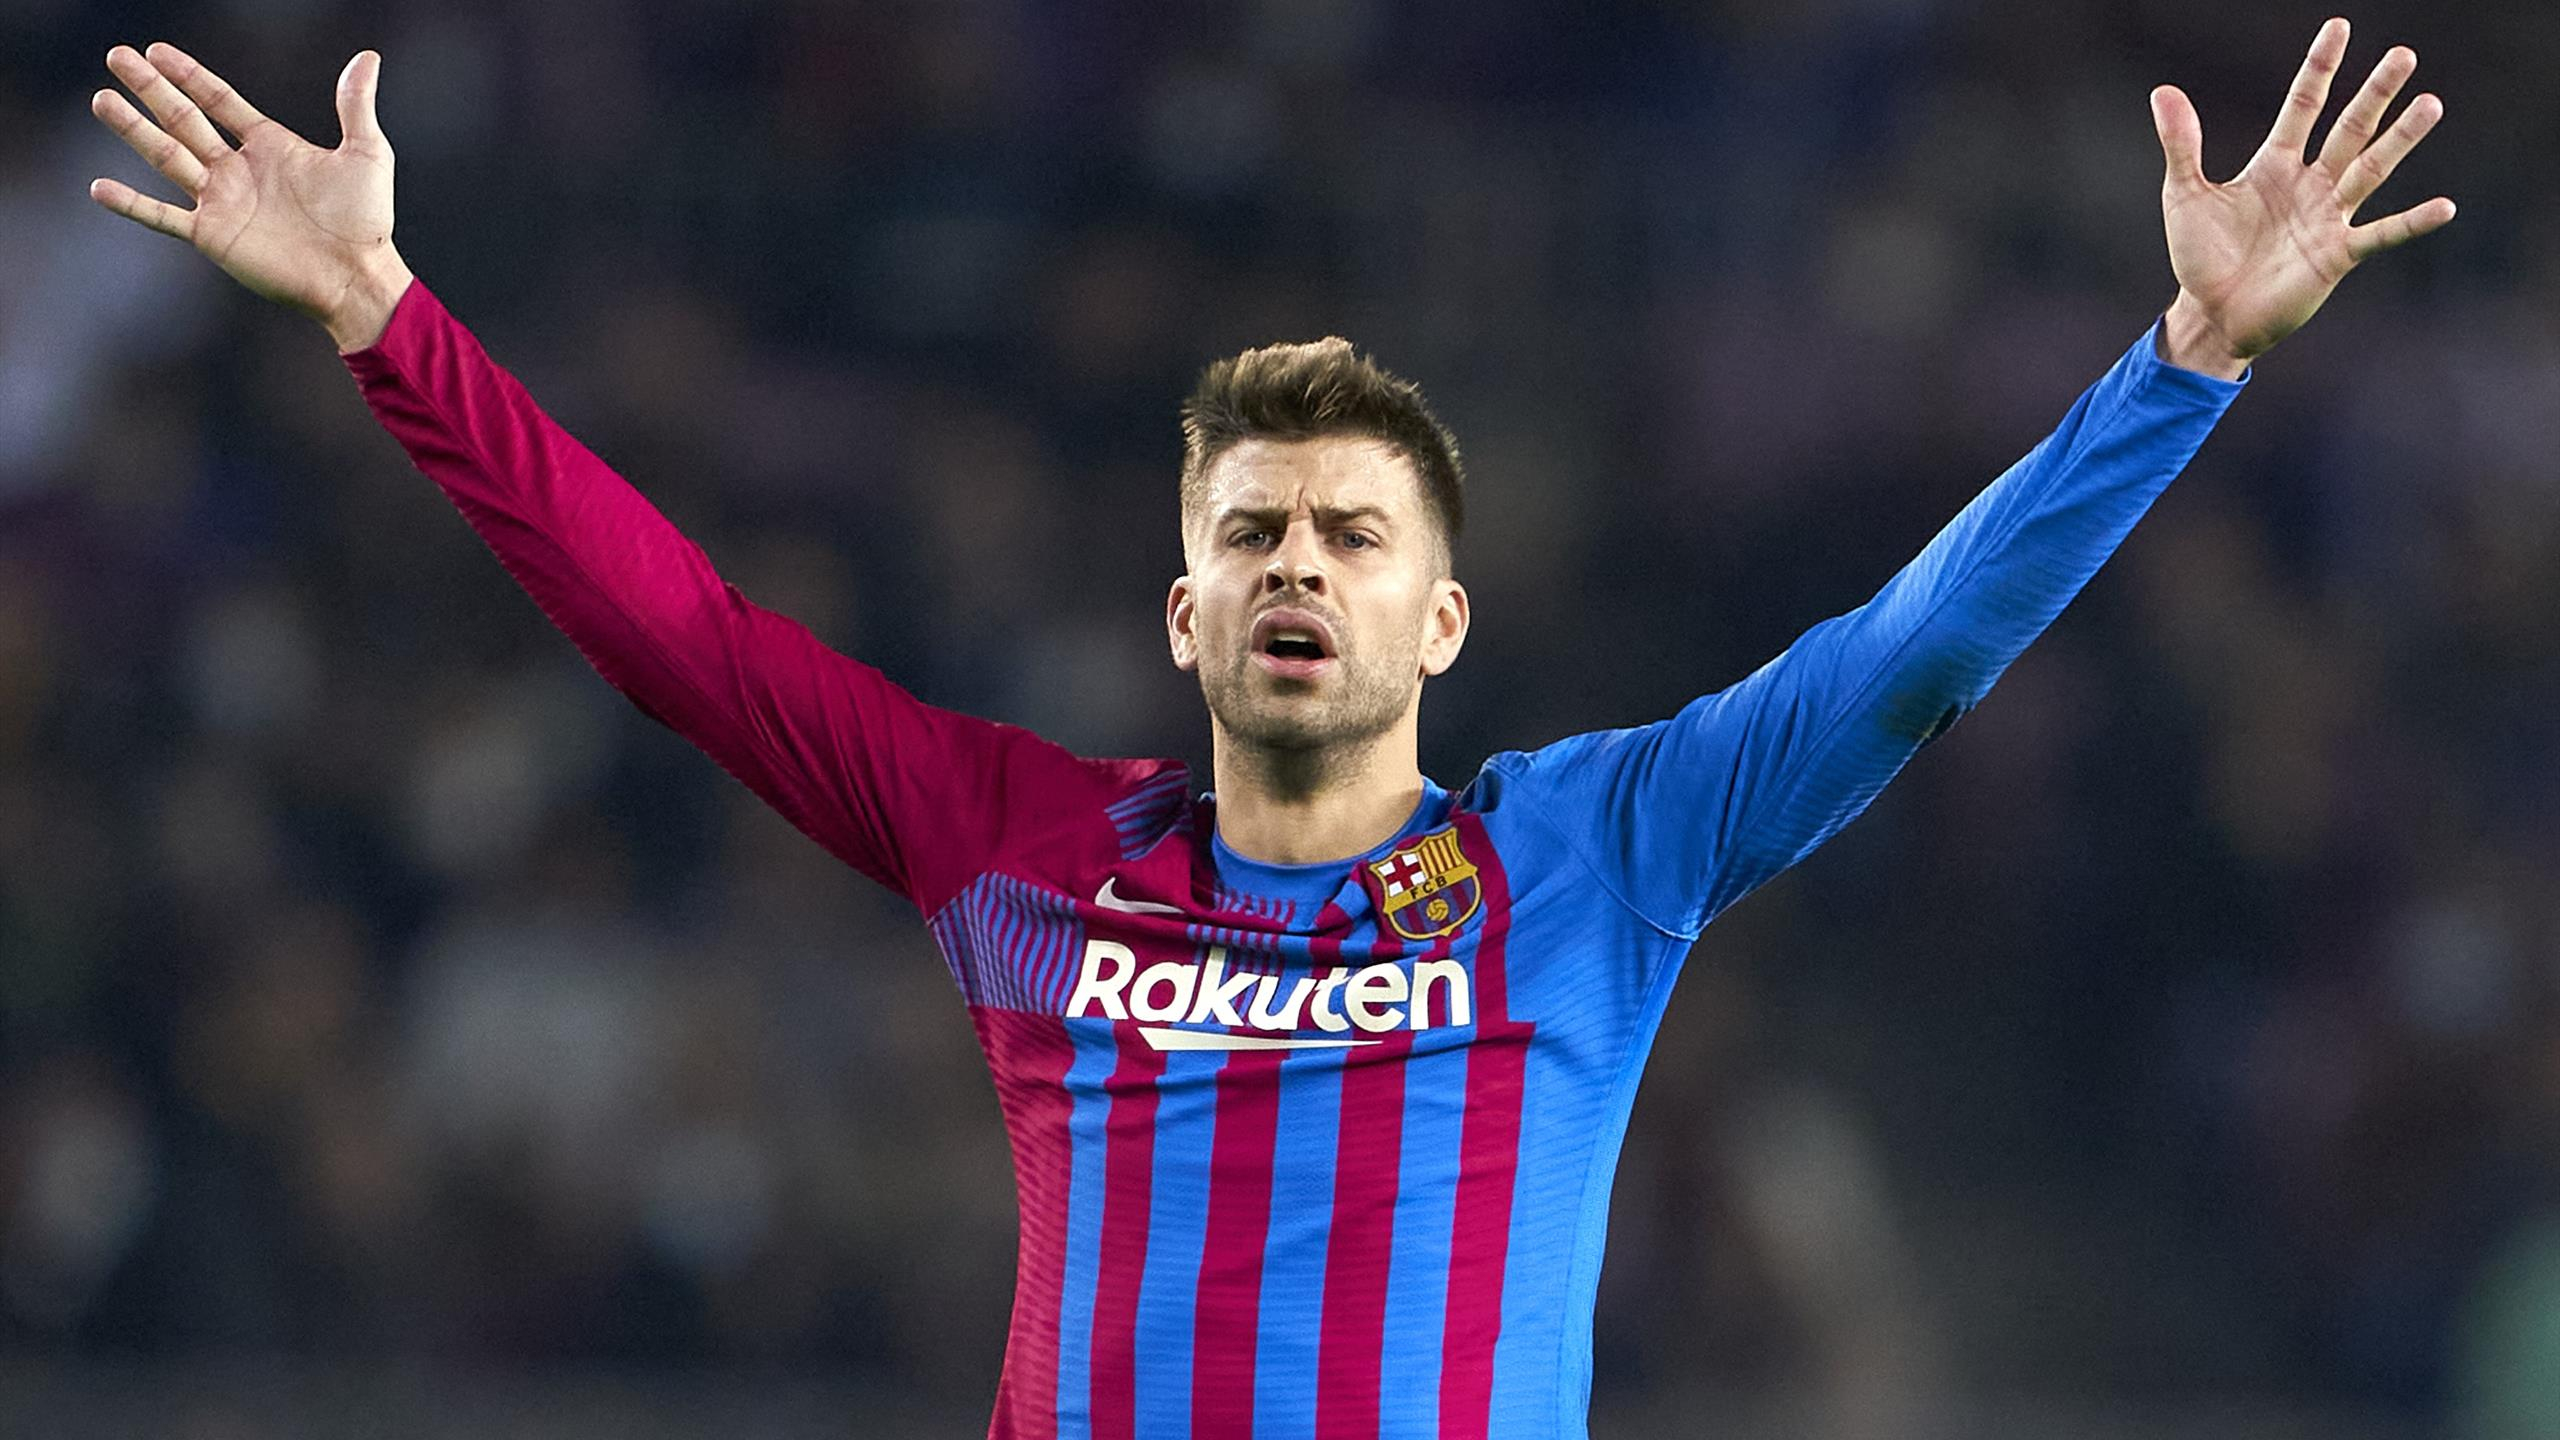 2560x1440 Gerard Pique hints at actual salary to debunk journalist's claim that he is Barcelona's highest earner Eurosport